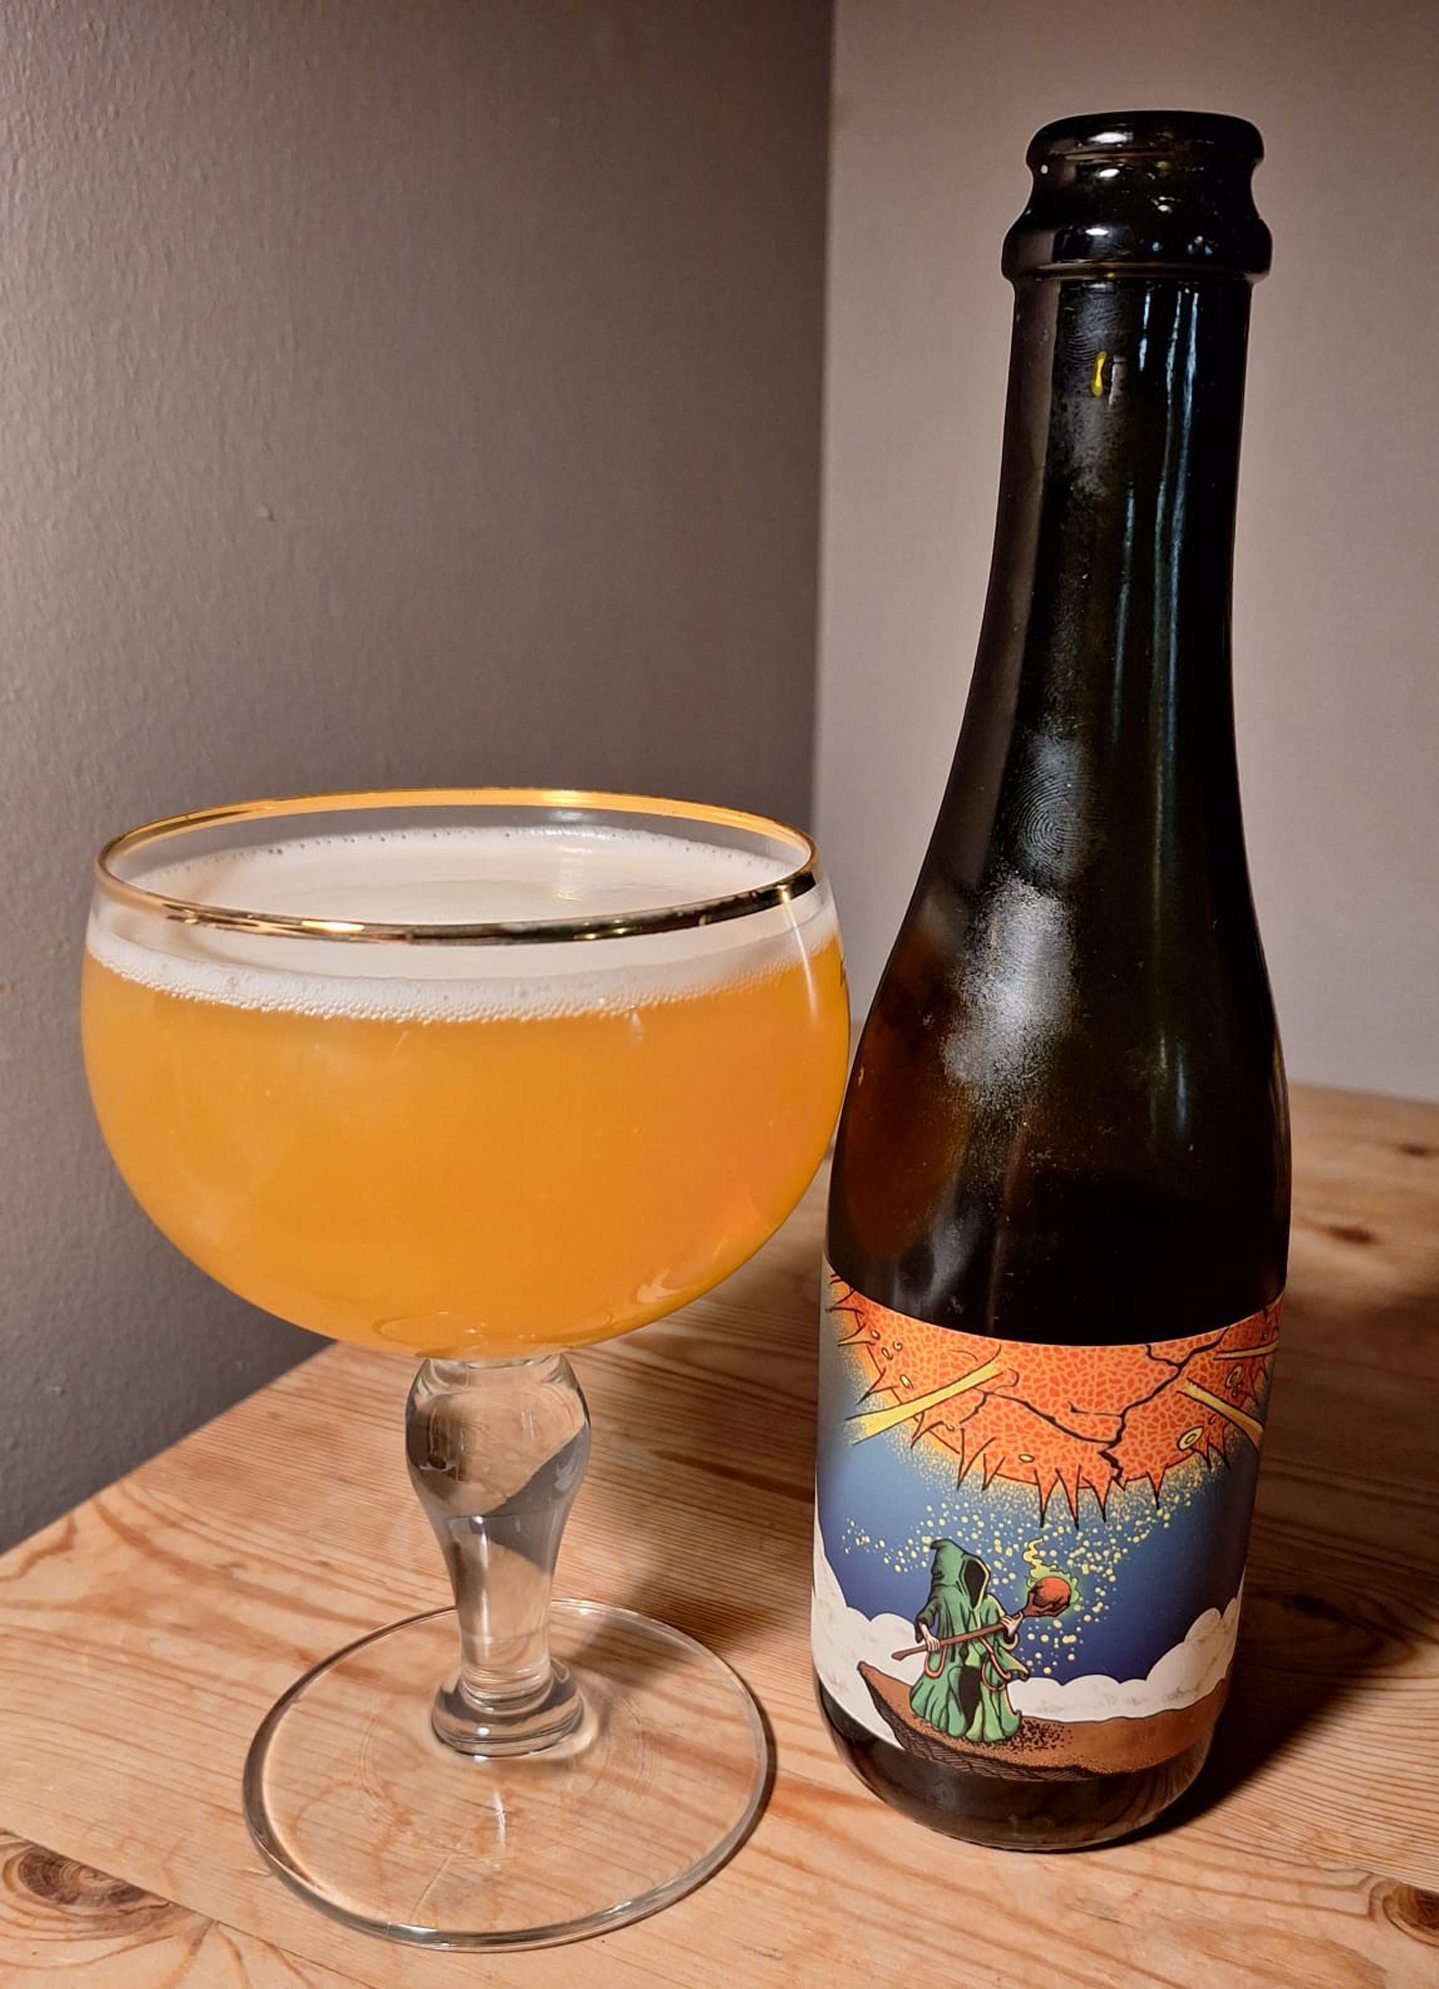 The Sunsmasher beer from Holy Goat poured into a glass 